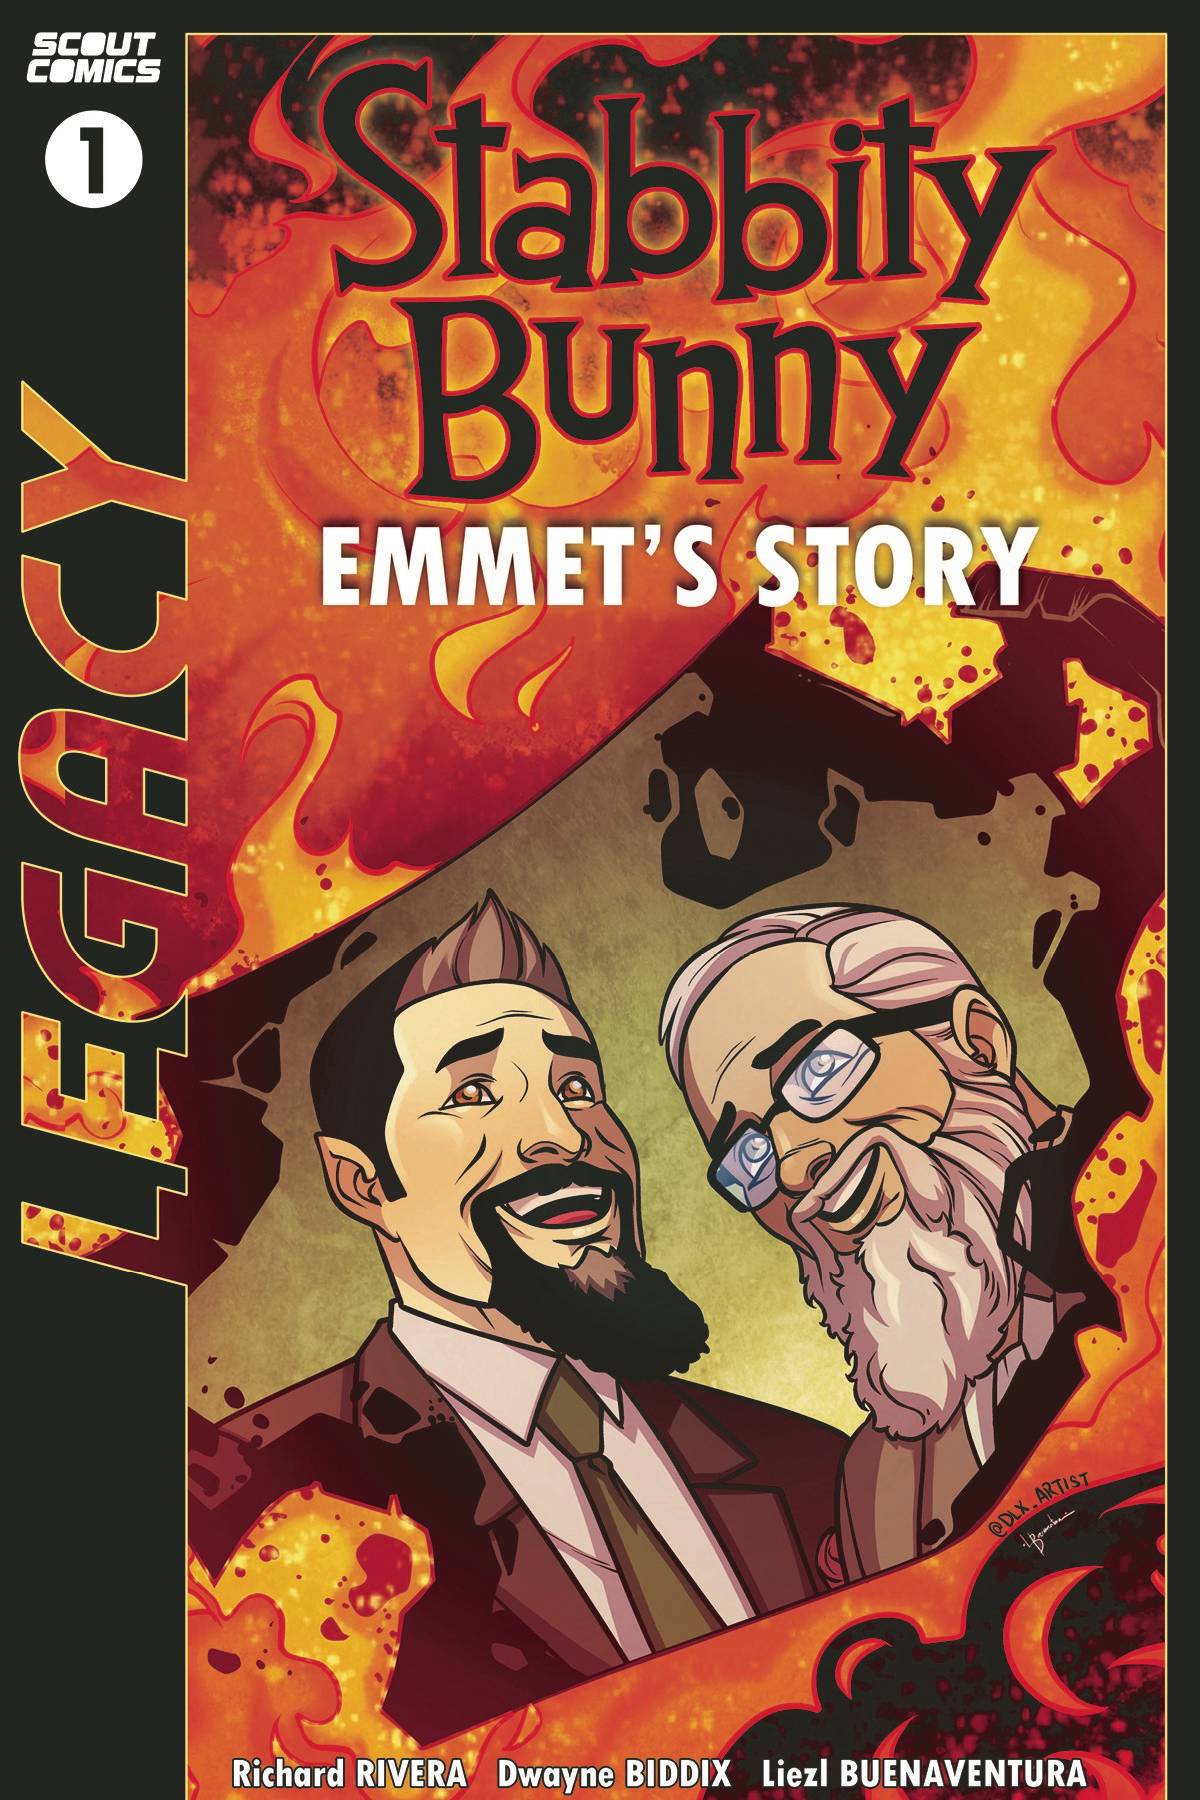 STABBITY BUNNY EMMETS STORY #1 SCOUT LEGACY ED